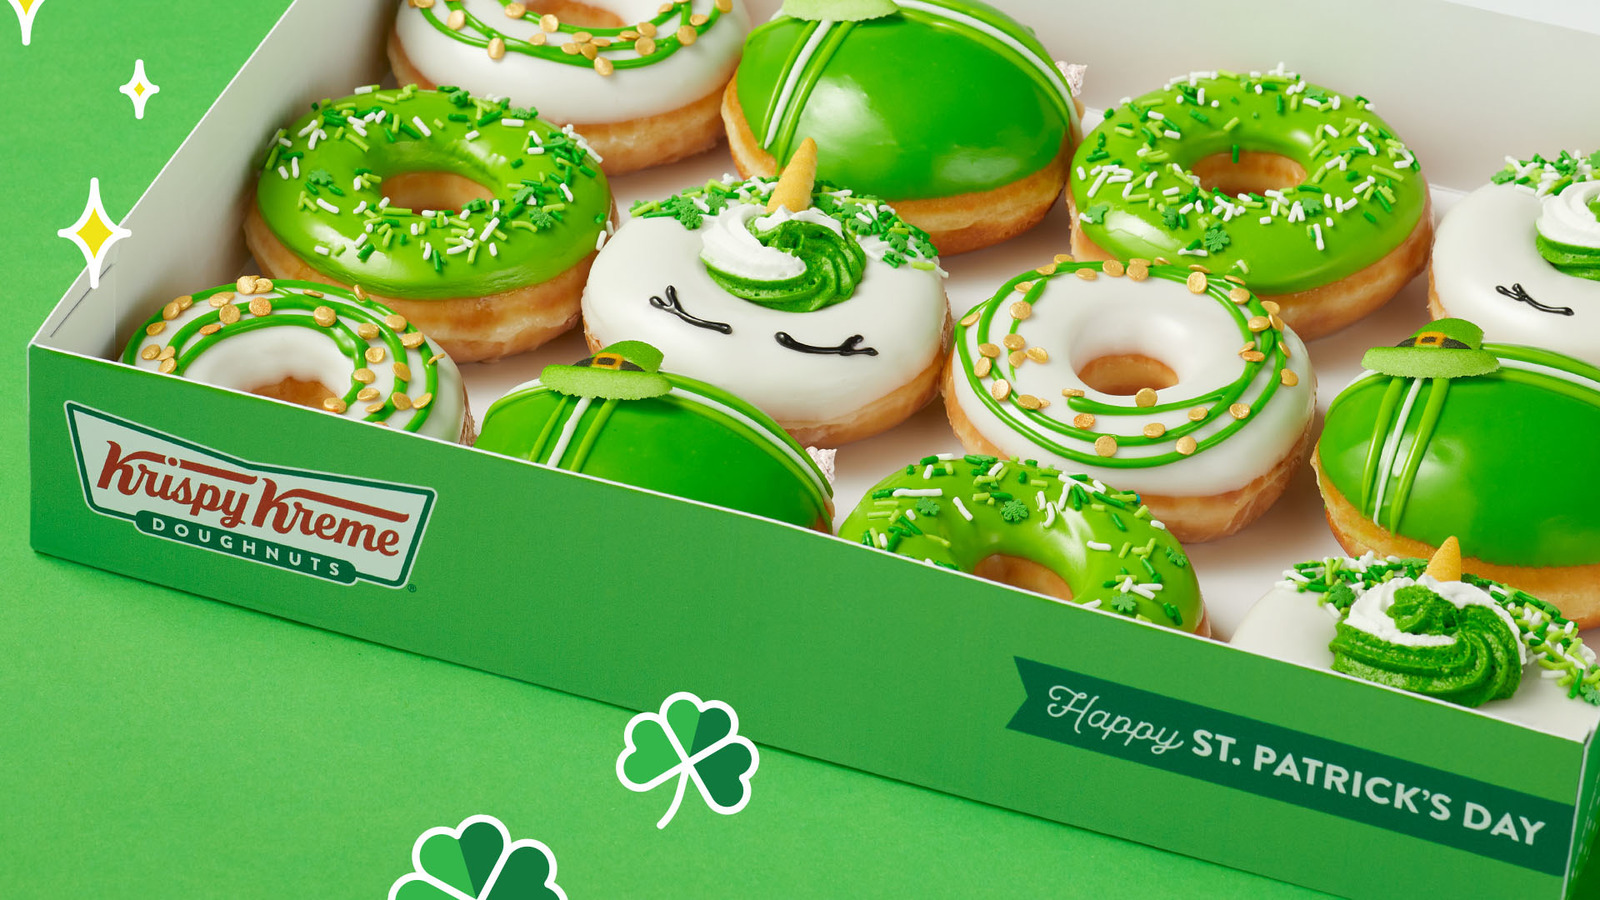 Everything You Need To Know About Krispy Kreme's New St. Patrick's Day